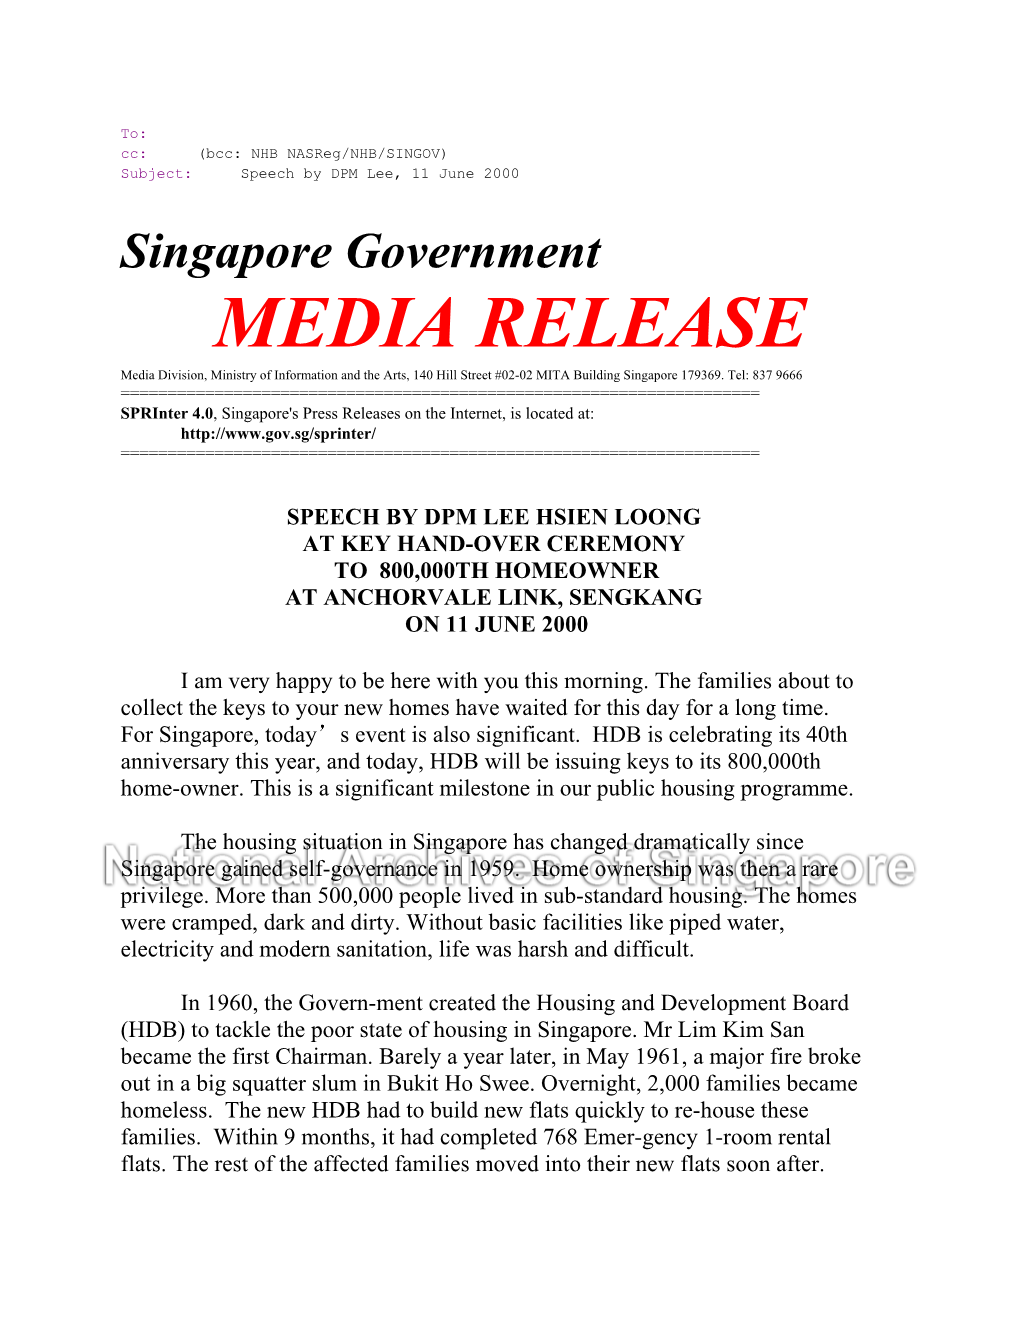 MEDIA RELEASE Media Division, Ministry of Information and the Arts, 140 Hill Street #02-02 MITA Building Singapore 179369